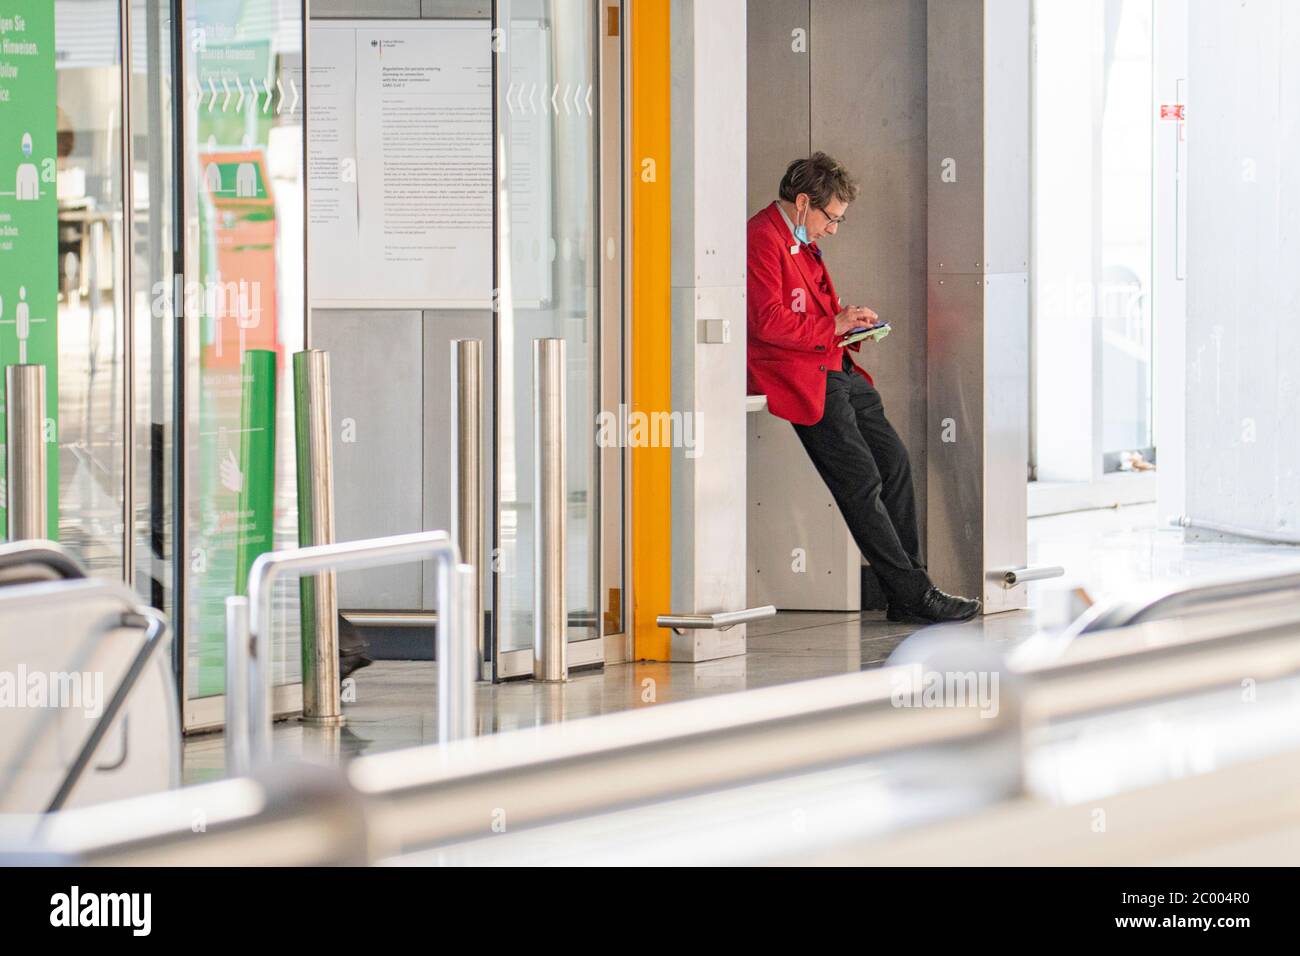 An airport worker in the check-in area at the nearly empty Frankfurt International Airport during the lockdown caused by the COVID-19 virus. Worldwide, the air traffic industry is heavily impacted by the massive drop in traffic. Stock Photo